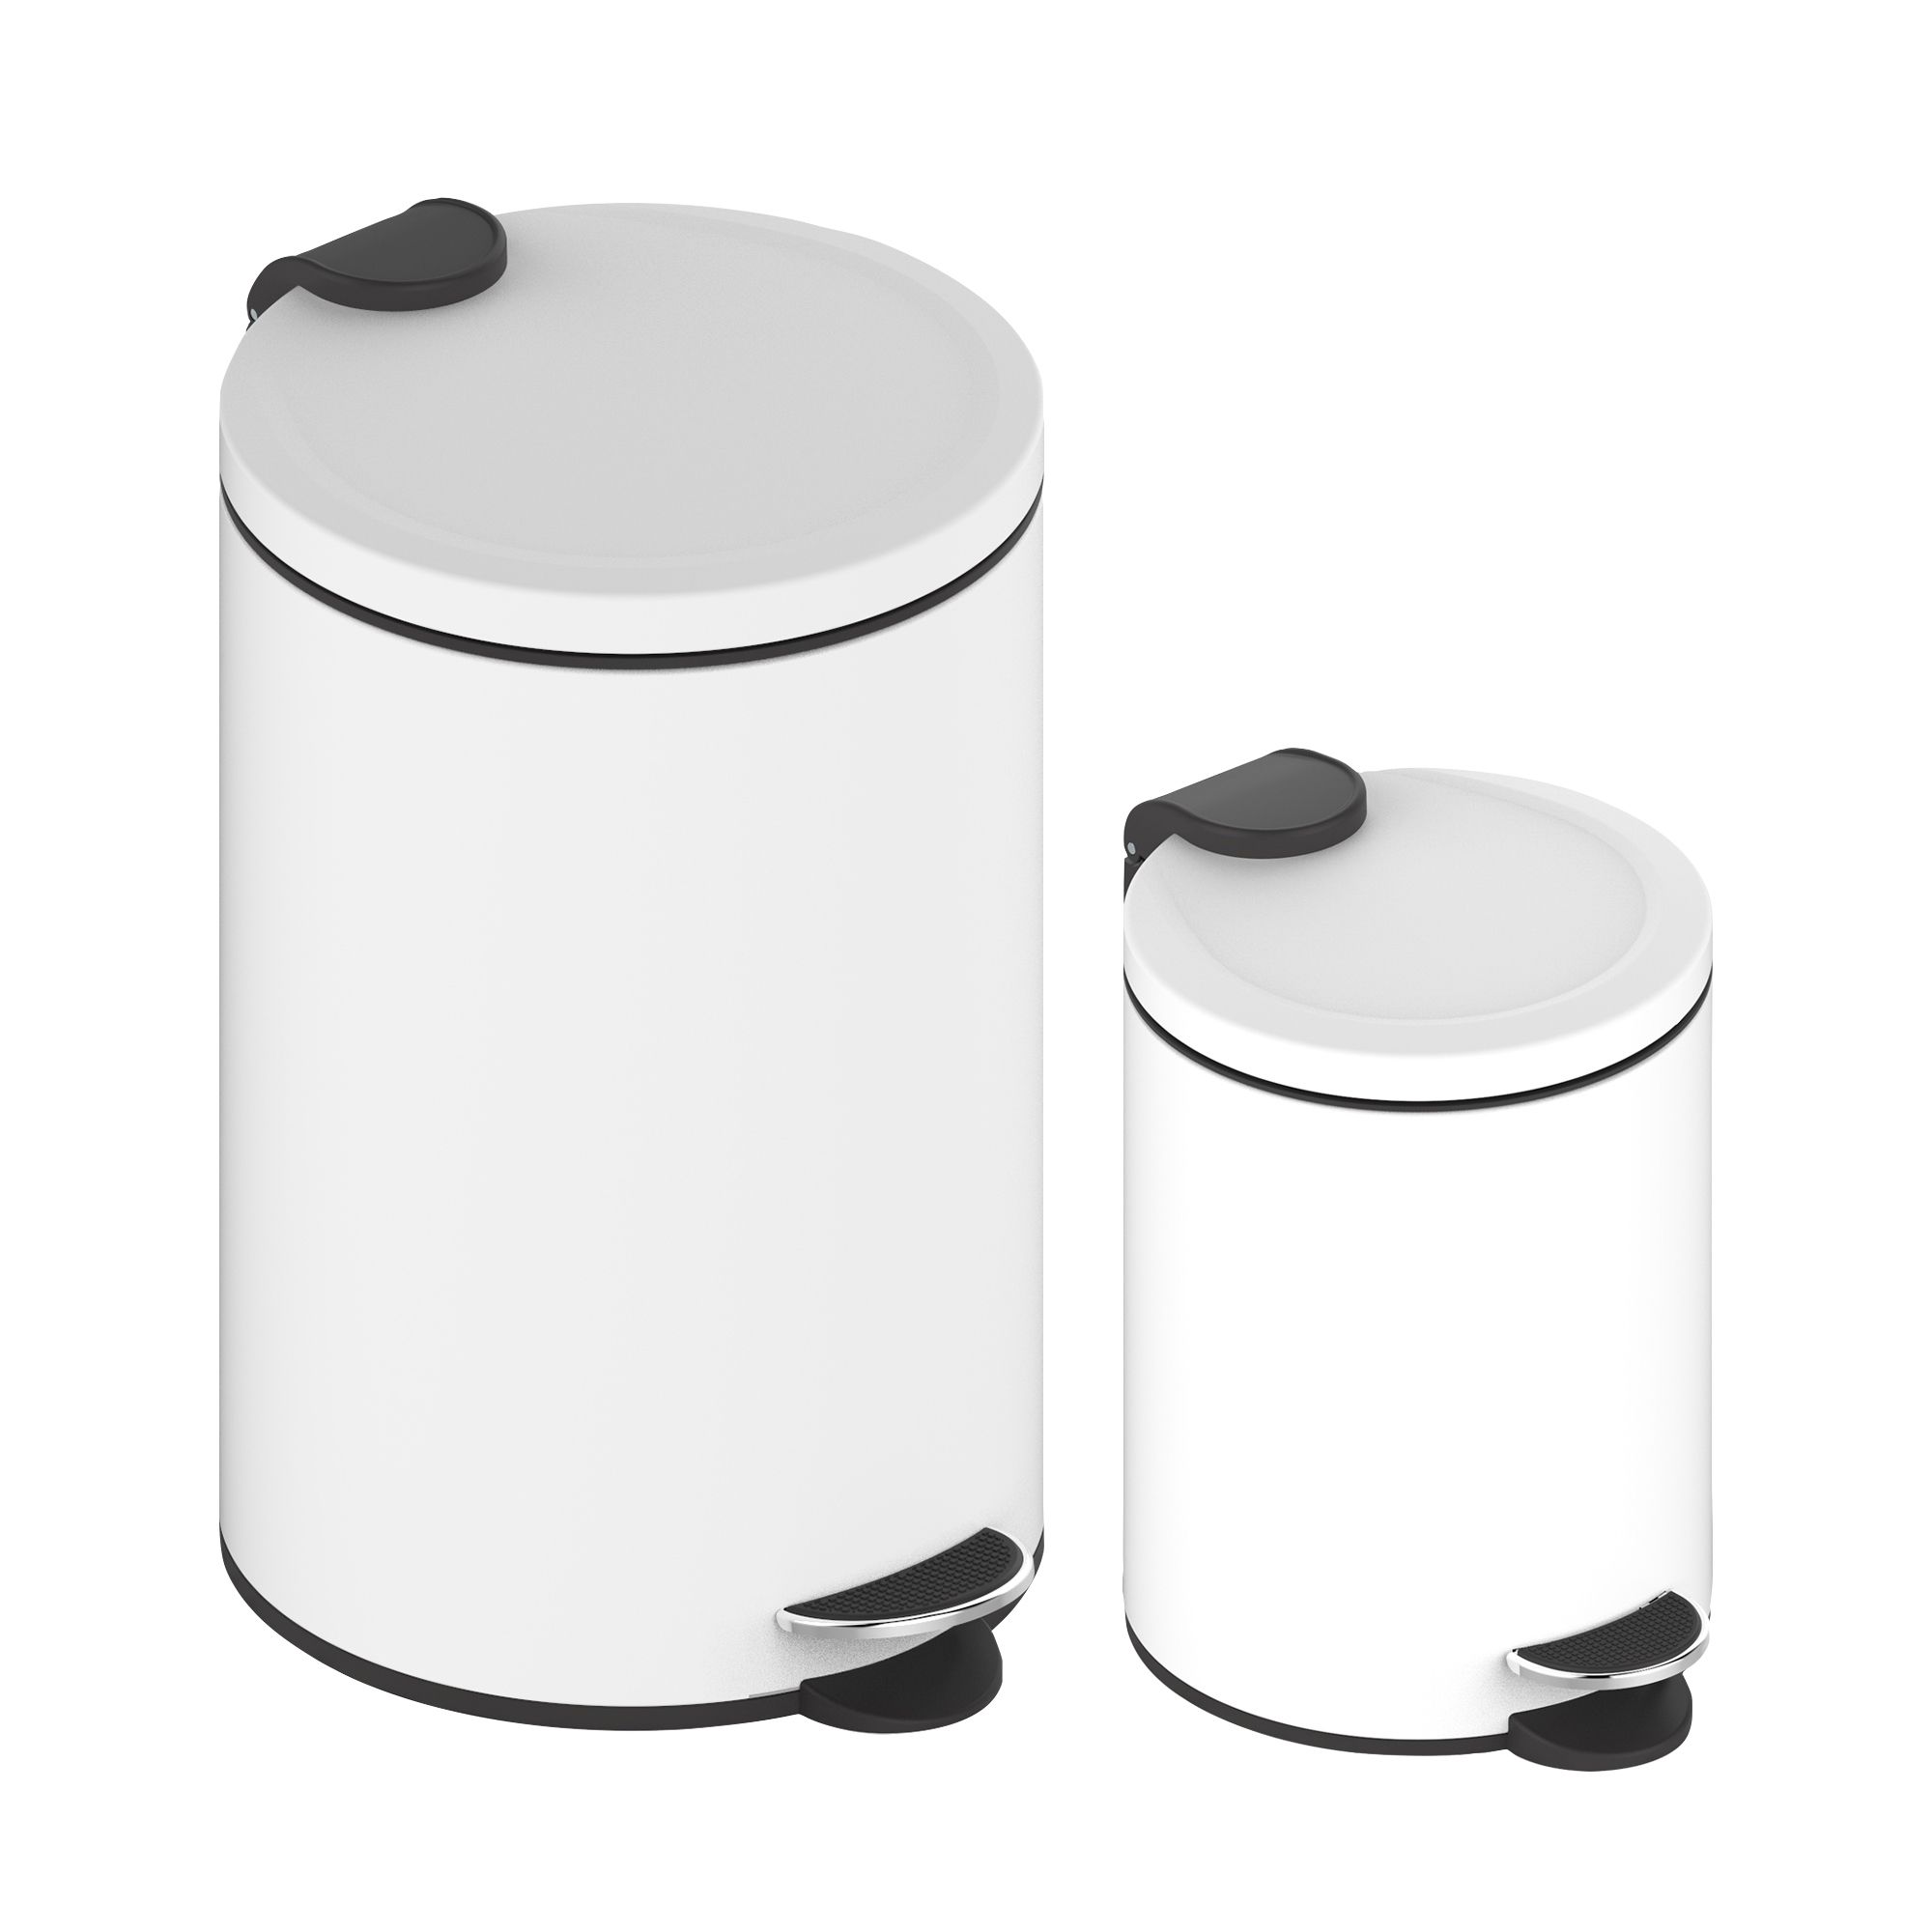 Innovaze 3.2 Gal./12L and 0.8 Gal./3L Stylish Round  Shape Metal Step-on Trash Can Combo - Matte White